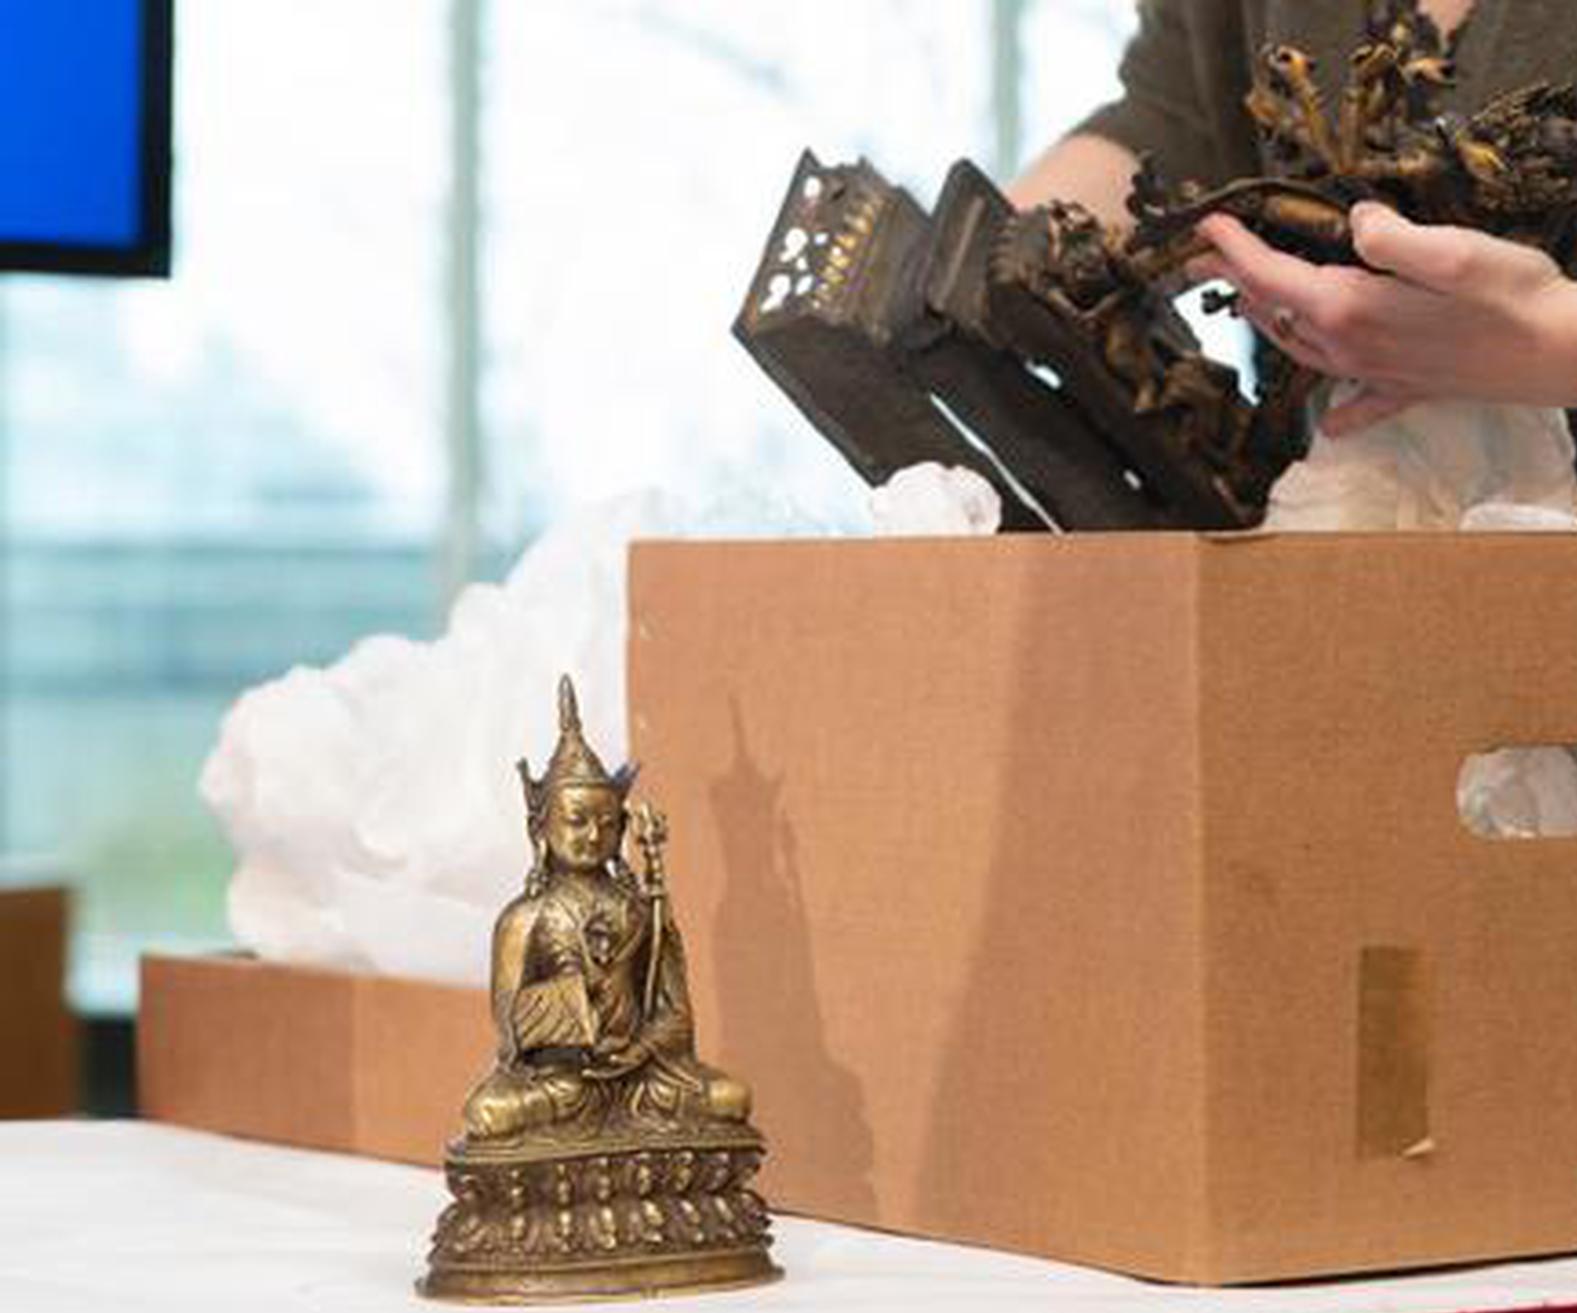 U.S. returns 38 ancient cultural artifacts to China